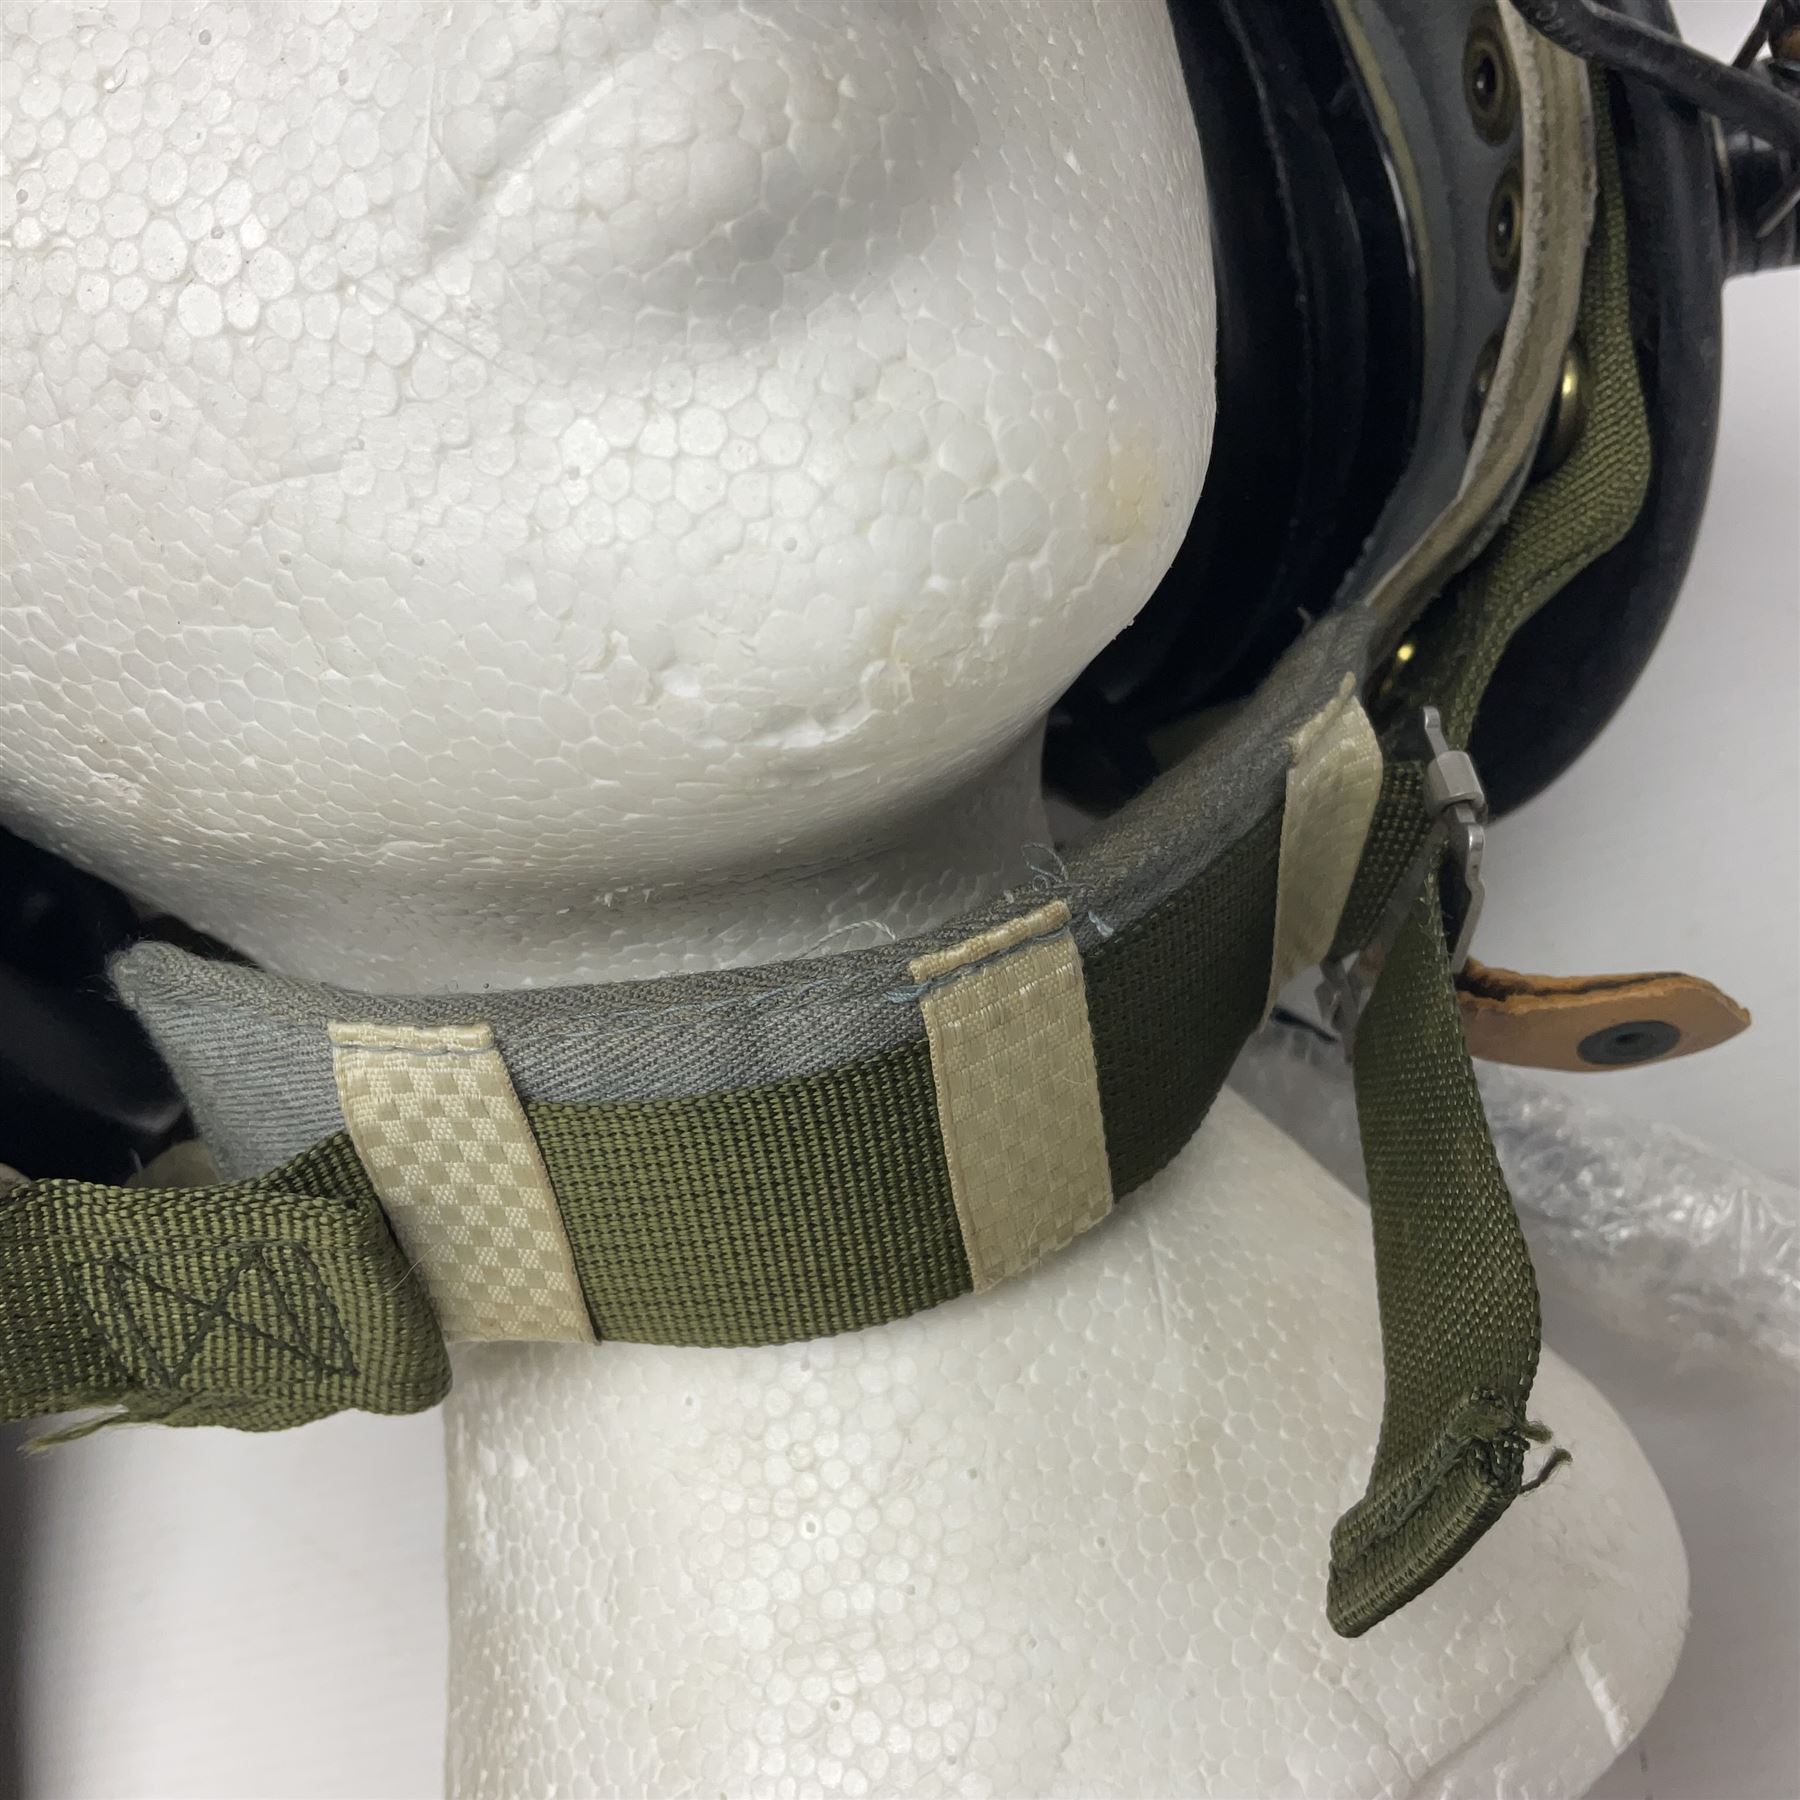 Silver grey SPH-4B Flight Helmet as used by helicopter pilots in the USAF and US Army in the 1990s; - Image 9 of 20